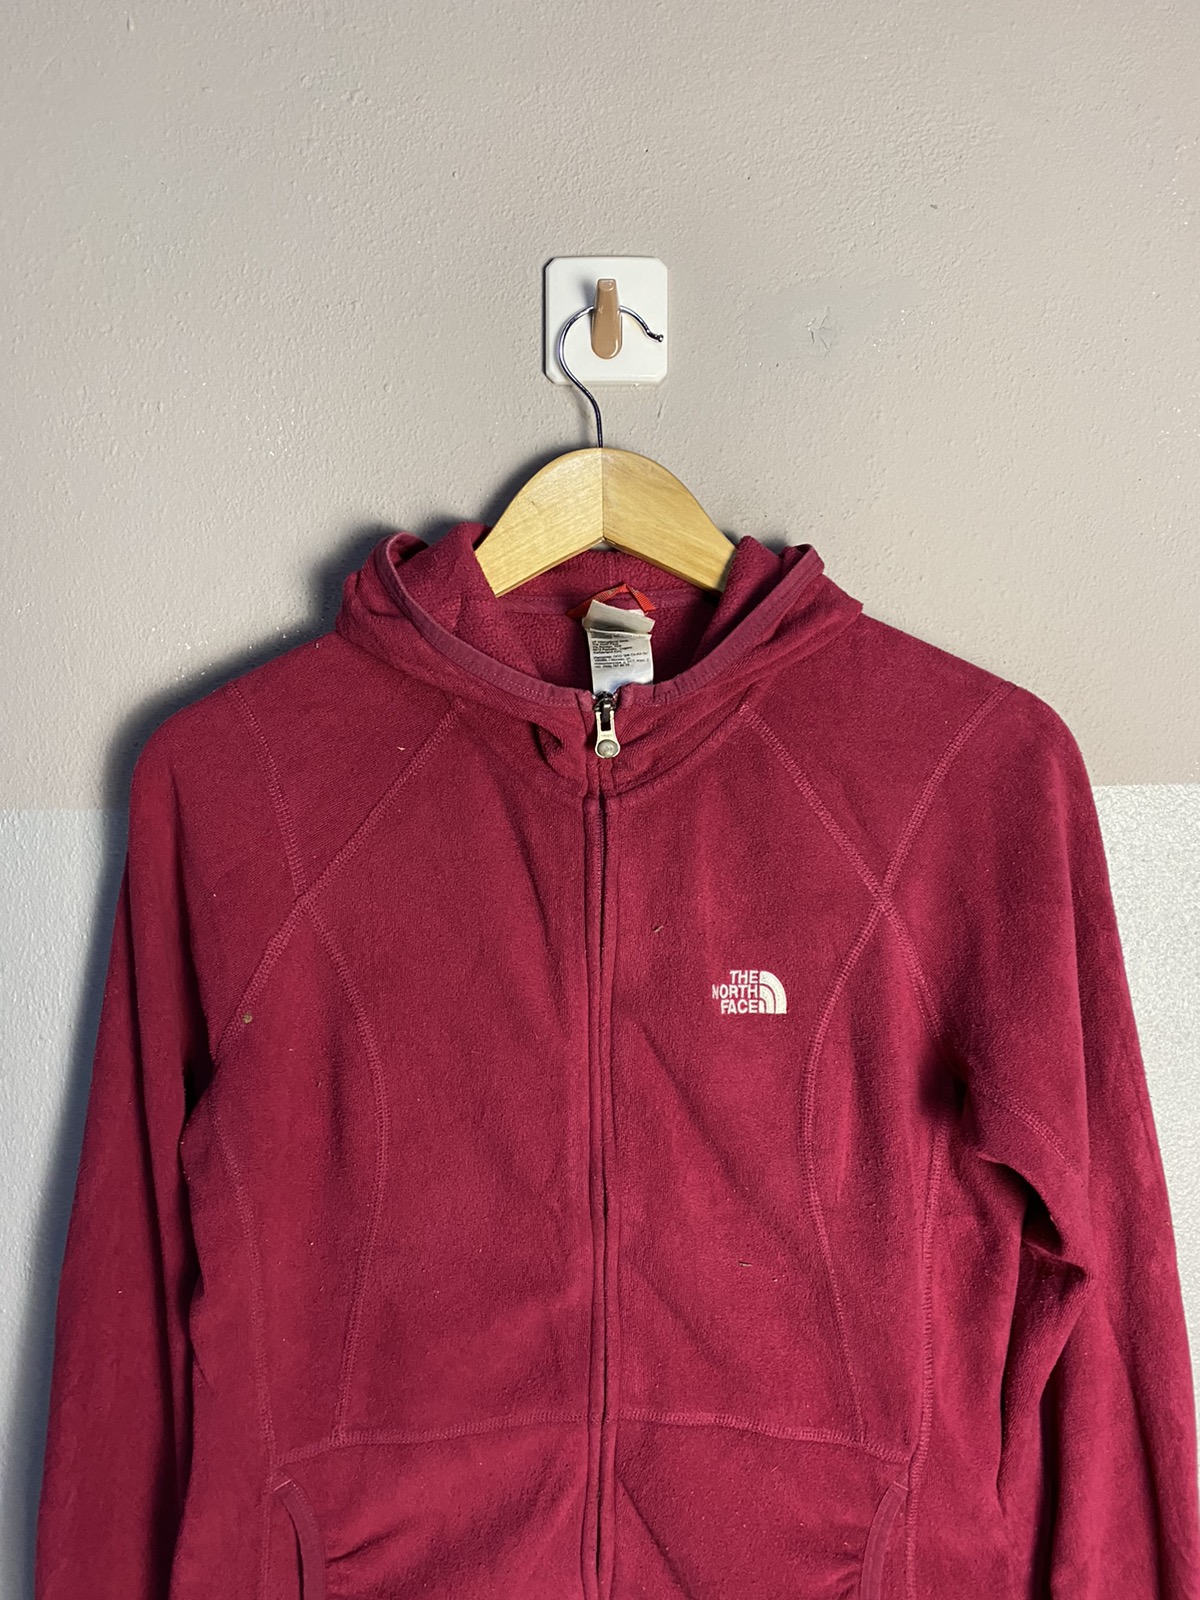 🔥SALE🔥THE NORTH FACE HOODIE - 5